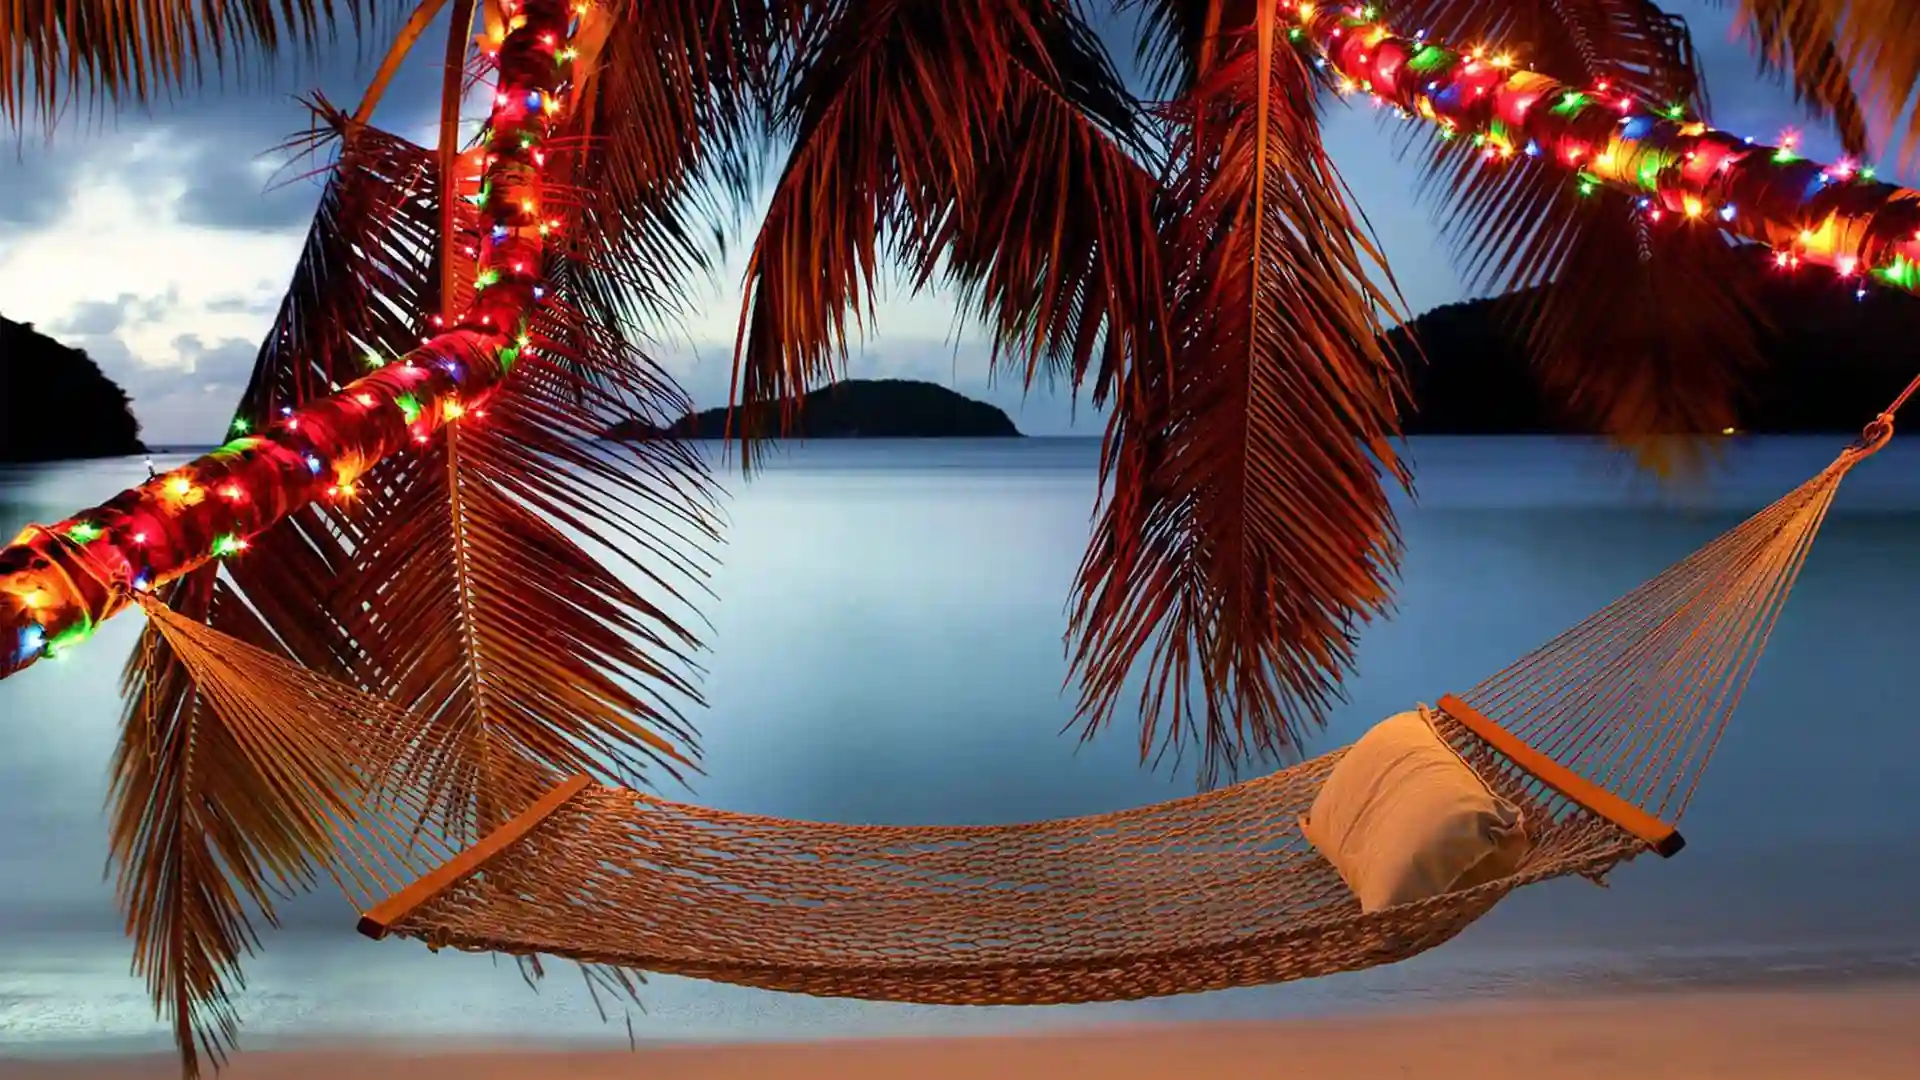 View of hammock beneath palm trees wrapped in Christmas lights near shoreline.